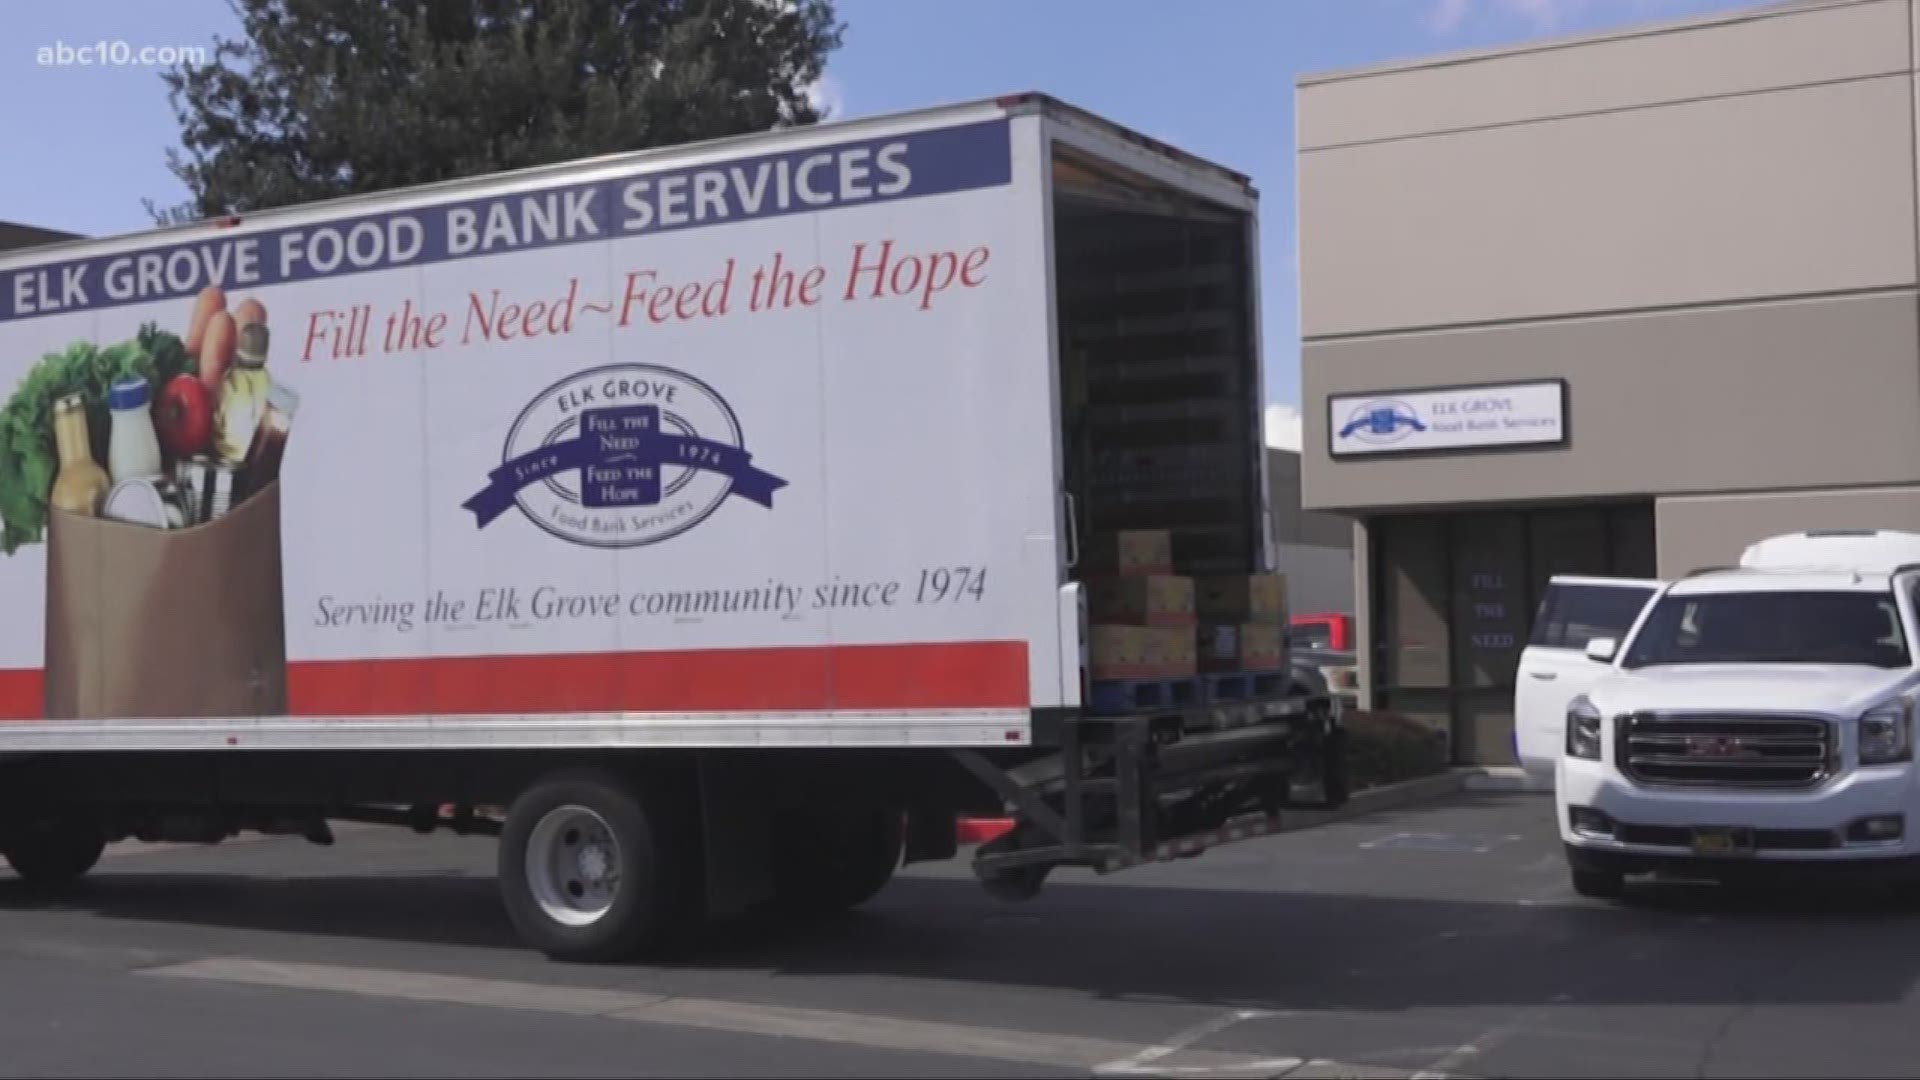 Normal donations from community members and grocery stores have slowed down, but demand has more than doubled for the Elk Grove Food Bank.